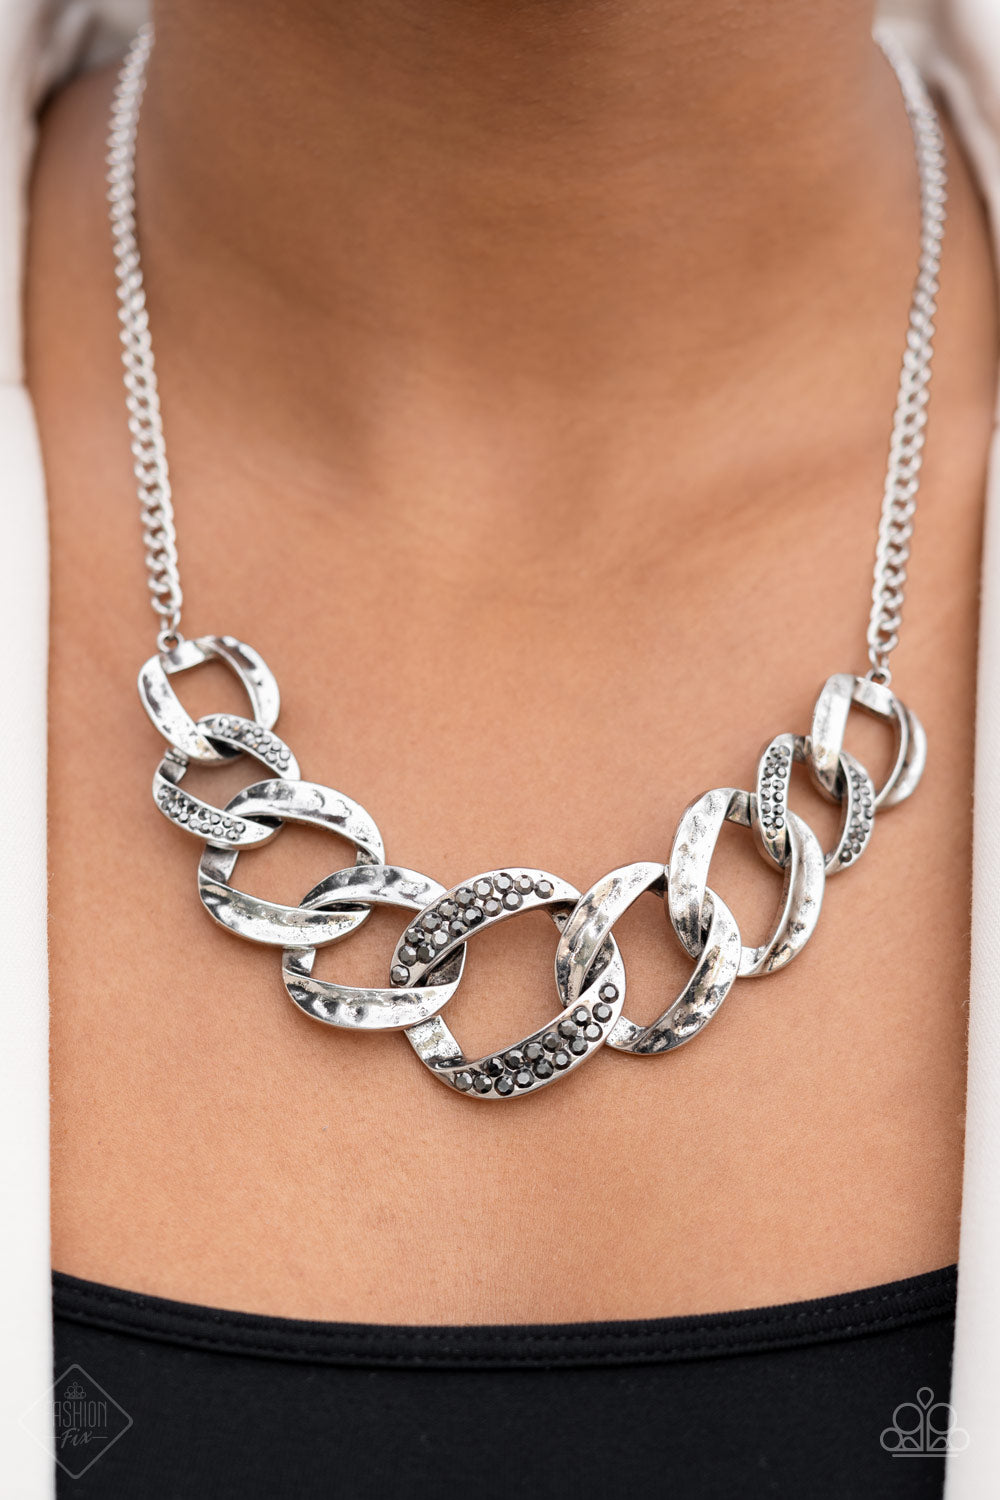 Paparazzi Bombshell Bling - Silver Fashion Fix Necklace - A Finishing Touch Jewelry